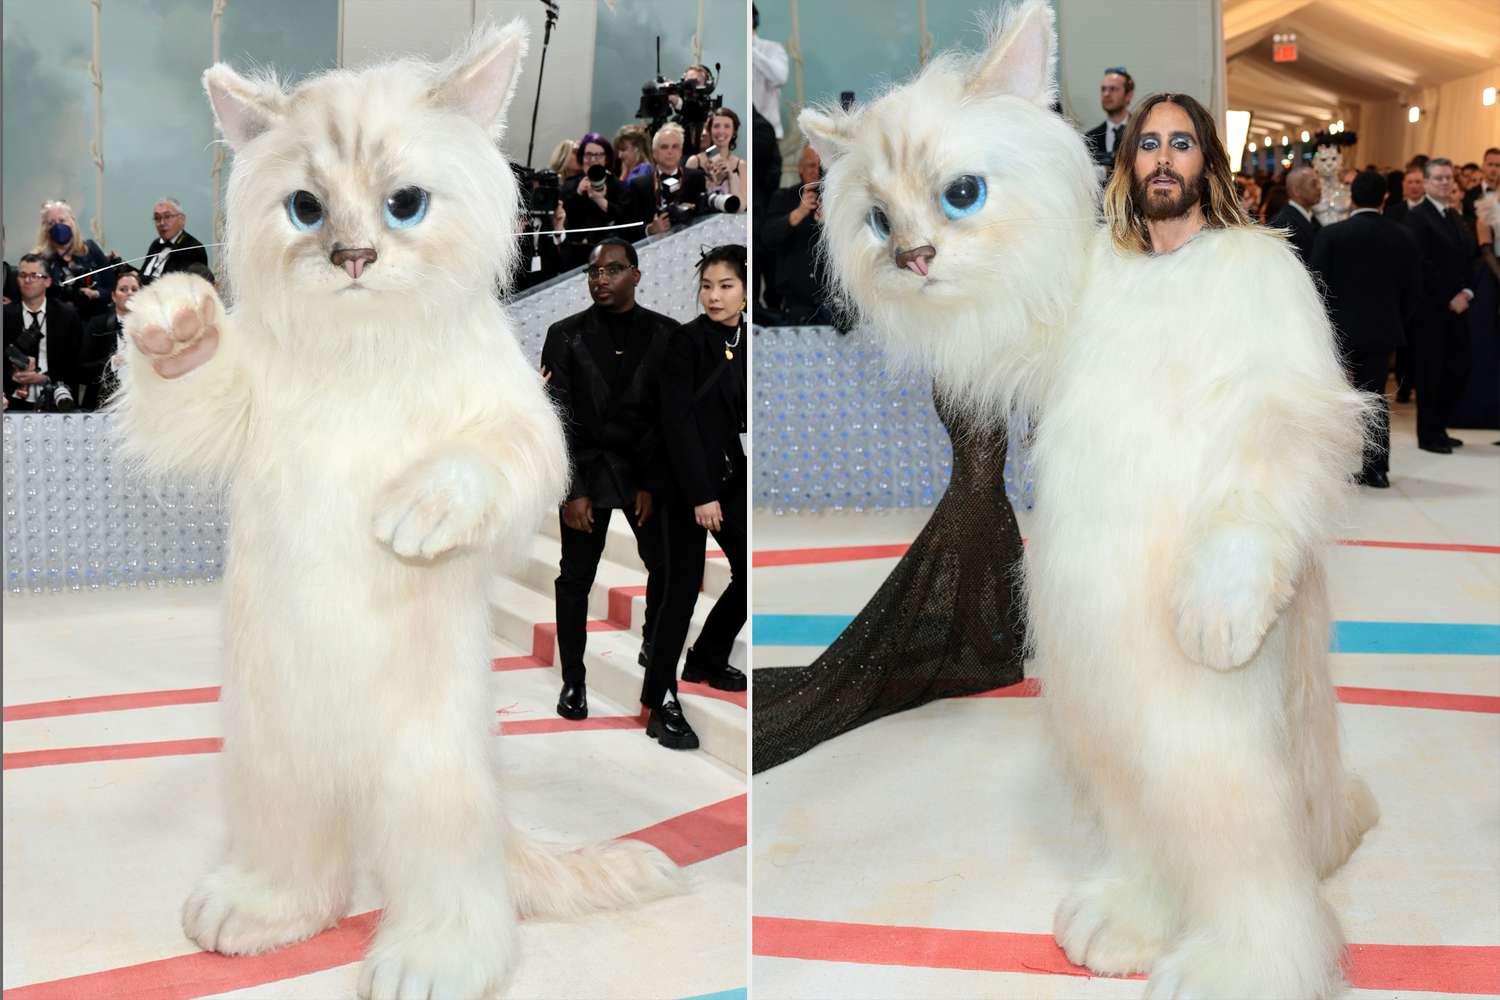 NEW YORK, NEW YORK - MAY 01: Jared Leto, dressed as Choupette, attends The 2023 Met Gala Celebrating "Karl Lagerfeld: A Line Of Beauty" at The Metropolitan Museum of Art on May 01, 2023 in New York City. (Photo by Jamie McCarthy/Getty Images)NEW YORK, NEW YORK - MAY 01: Jared Leto, dressed as Choupette, attends The 2023 Met Gala Celebrating "Karl Lagerfeld: A Line Of Beauty" at The Metropolitan Museum of Art on May 01, 2023 in New York City. (Photo by Dimitrios Kambouris/Getty Images for The Met Museum/Vogue)